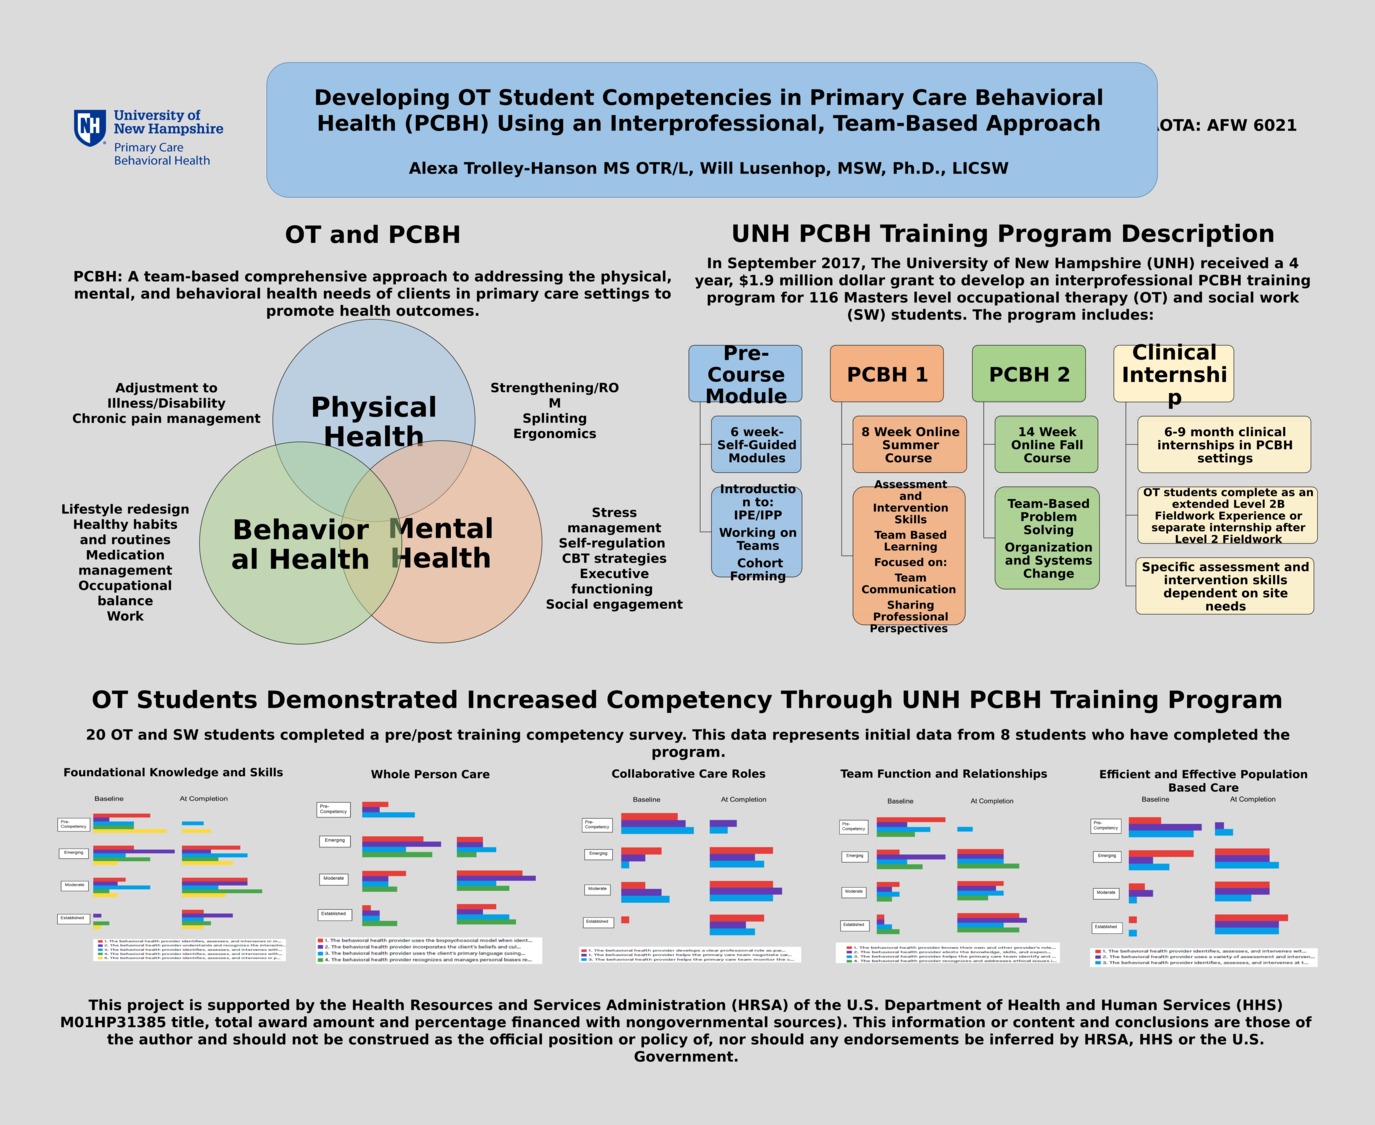 Developing Ot Student Competencies In Primary Care Behavioral Health (Pcbh) Using An Interprofessional, Team-Based Approach  Alexa Trolley-Hanson Ms Otr/L, Will Lusenhop, Msw, Ph.D., Licsw by atrolley